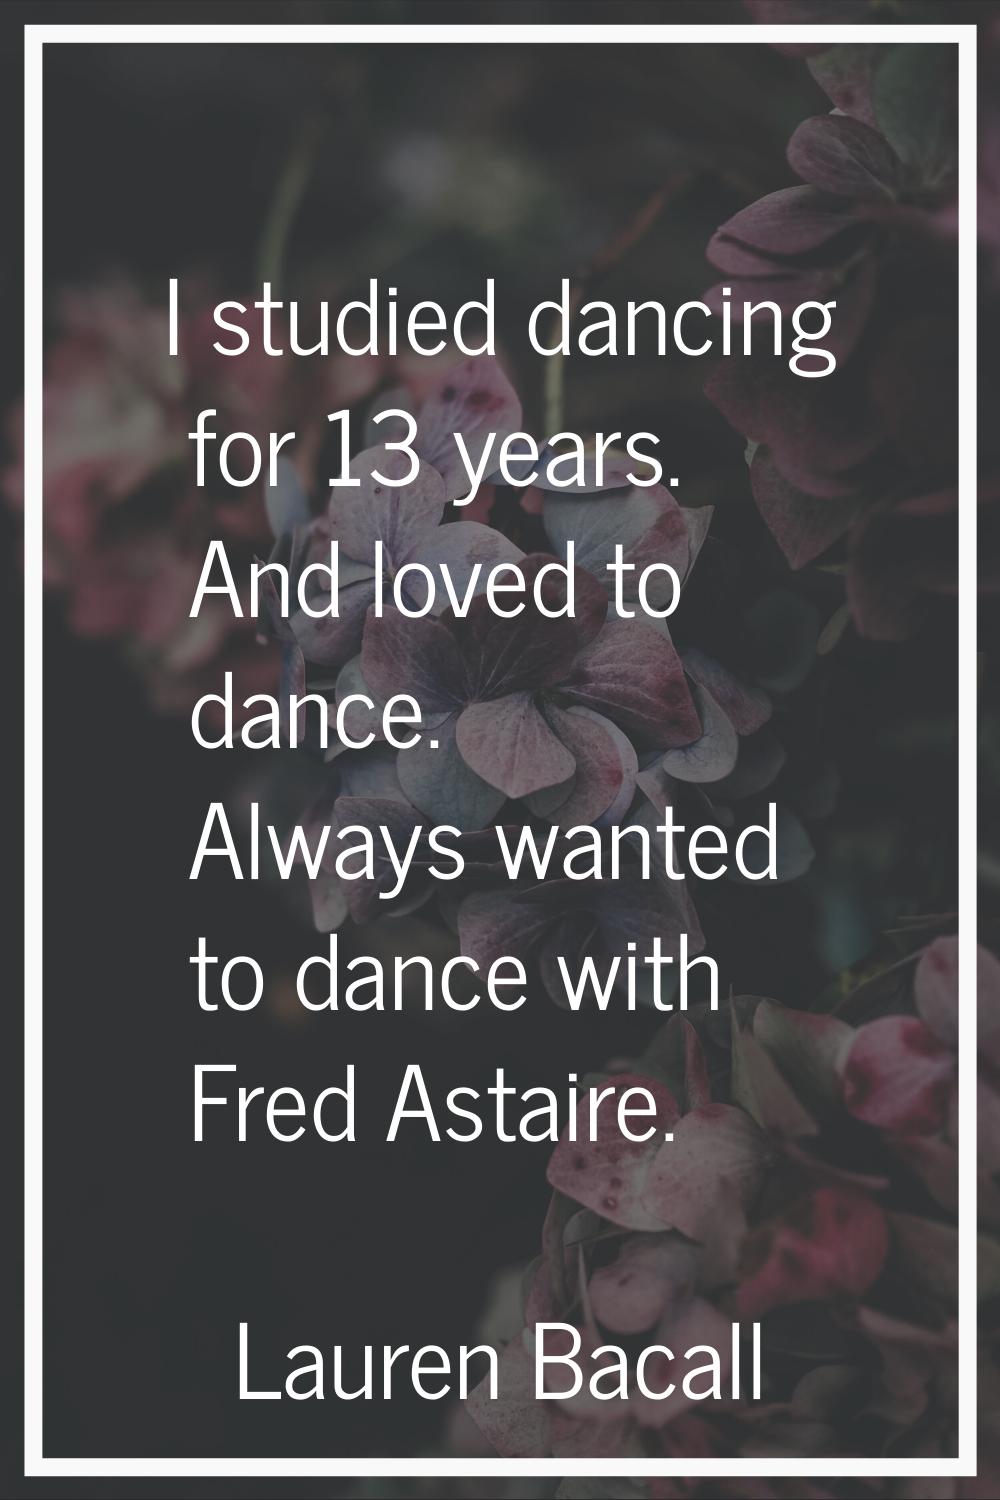 I studied dancing for 13 years. And loved to dance. Always wanted to dance with Fred Astaire.